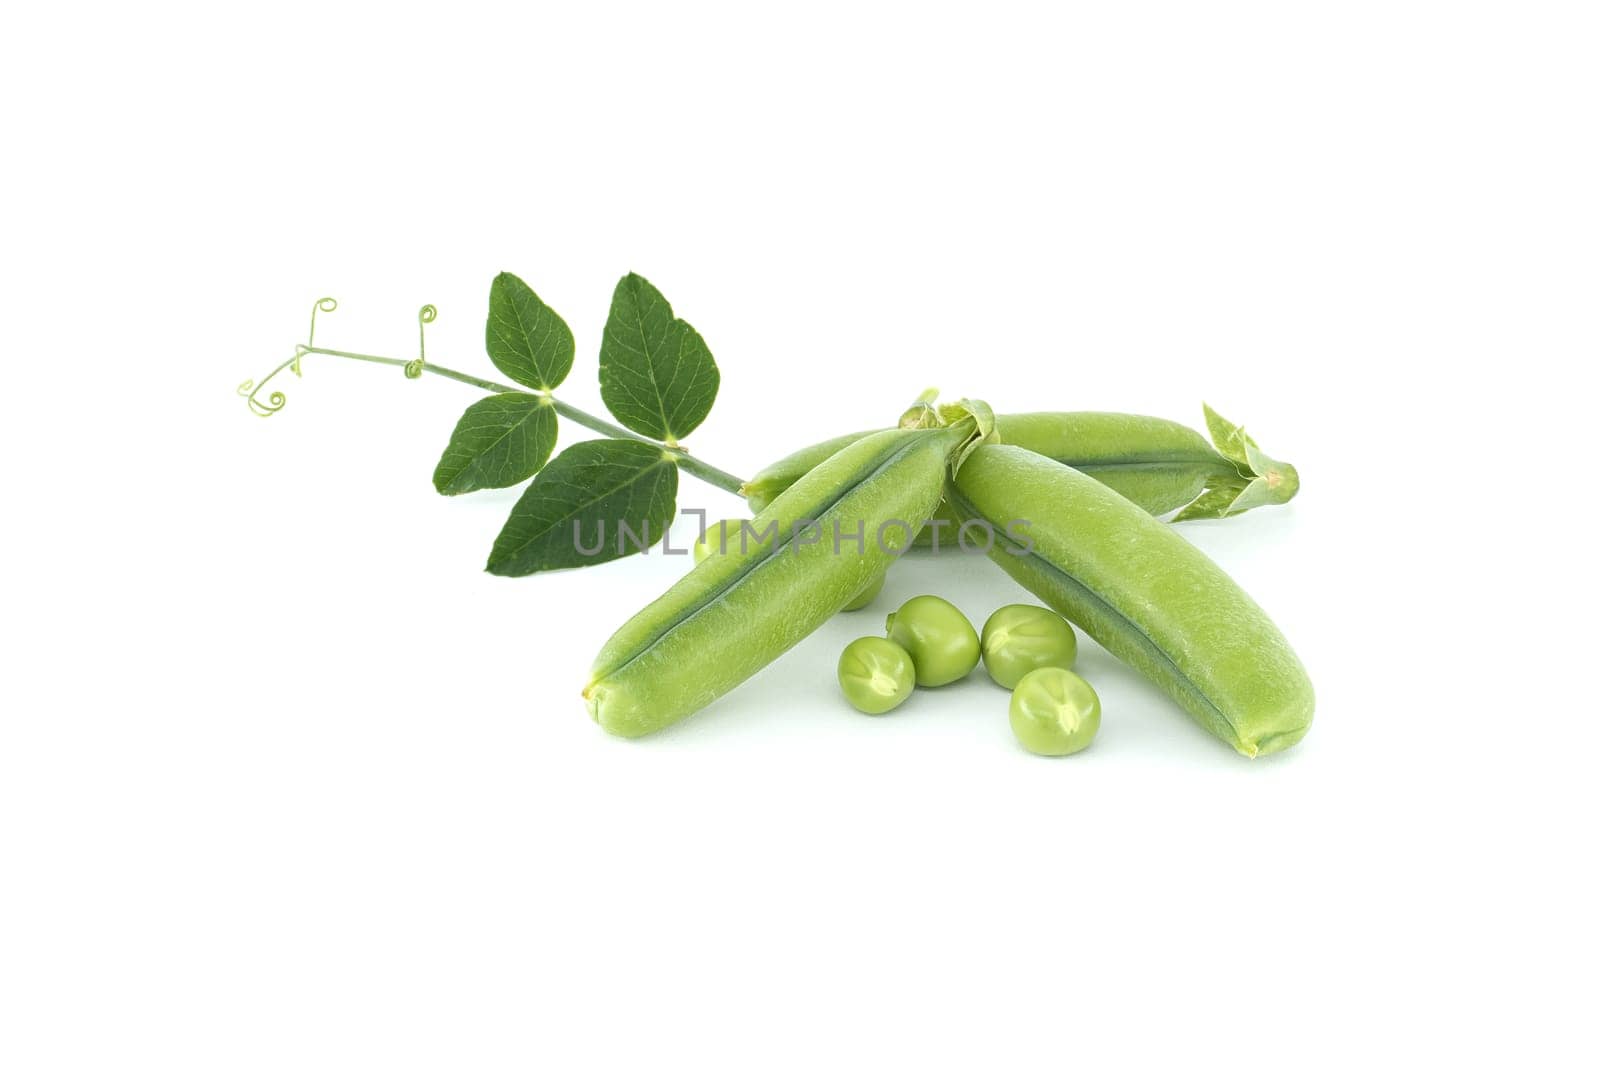 Group of fresh green peas, pea pods with green leaves and open pea pod in close up isolated on white background